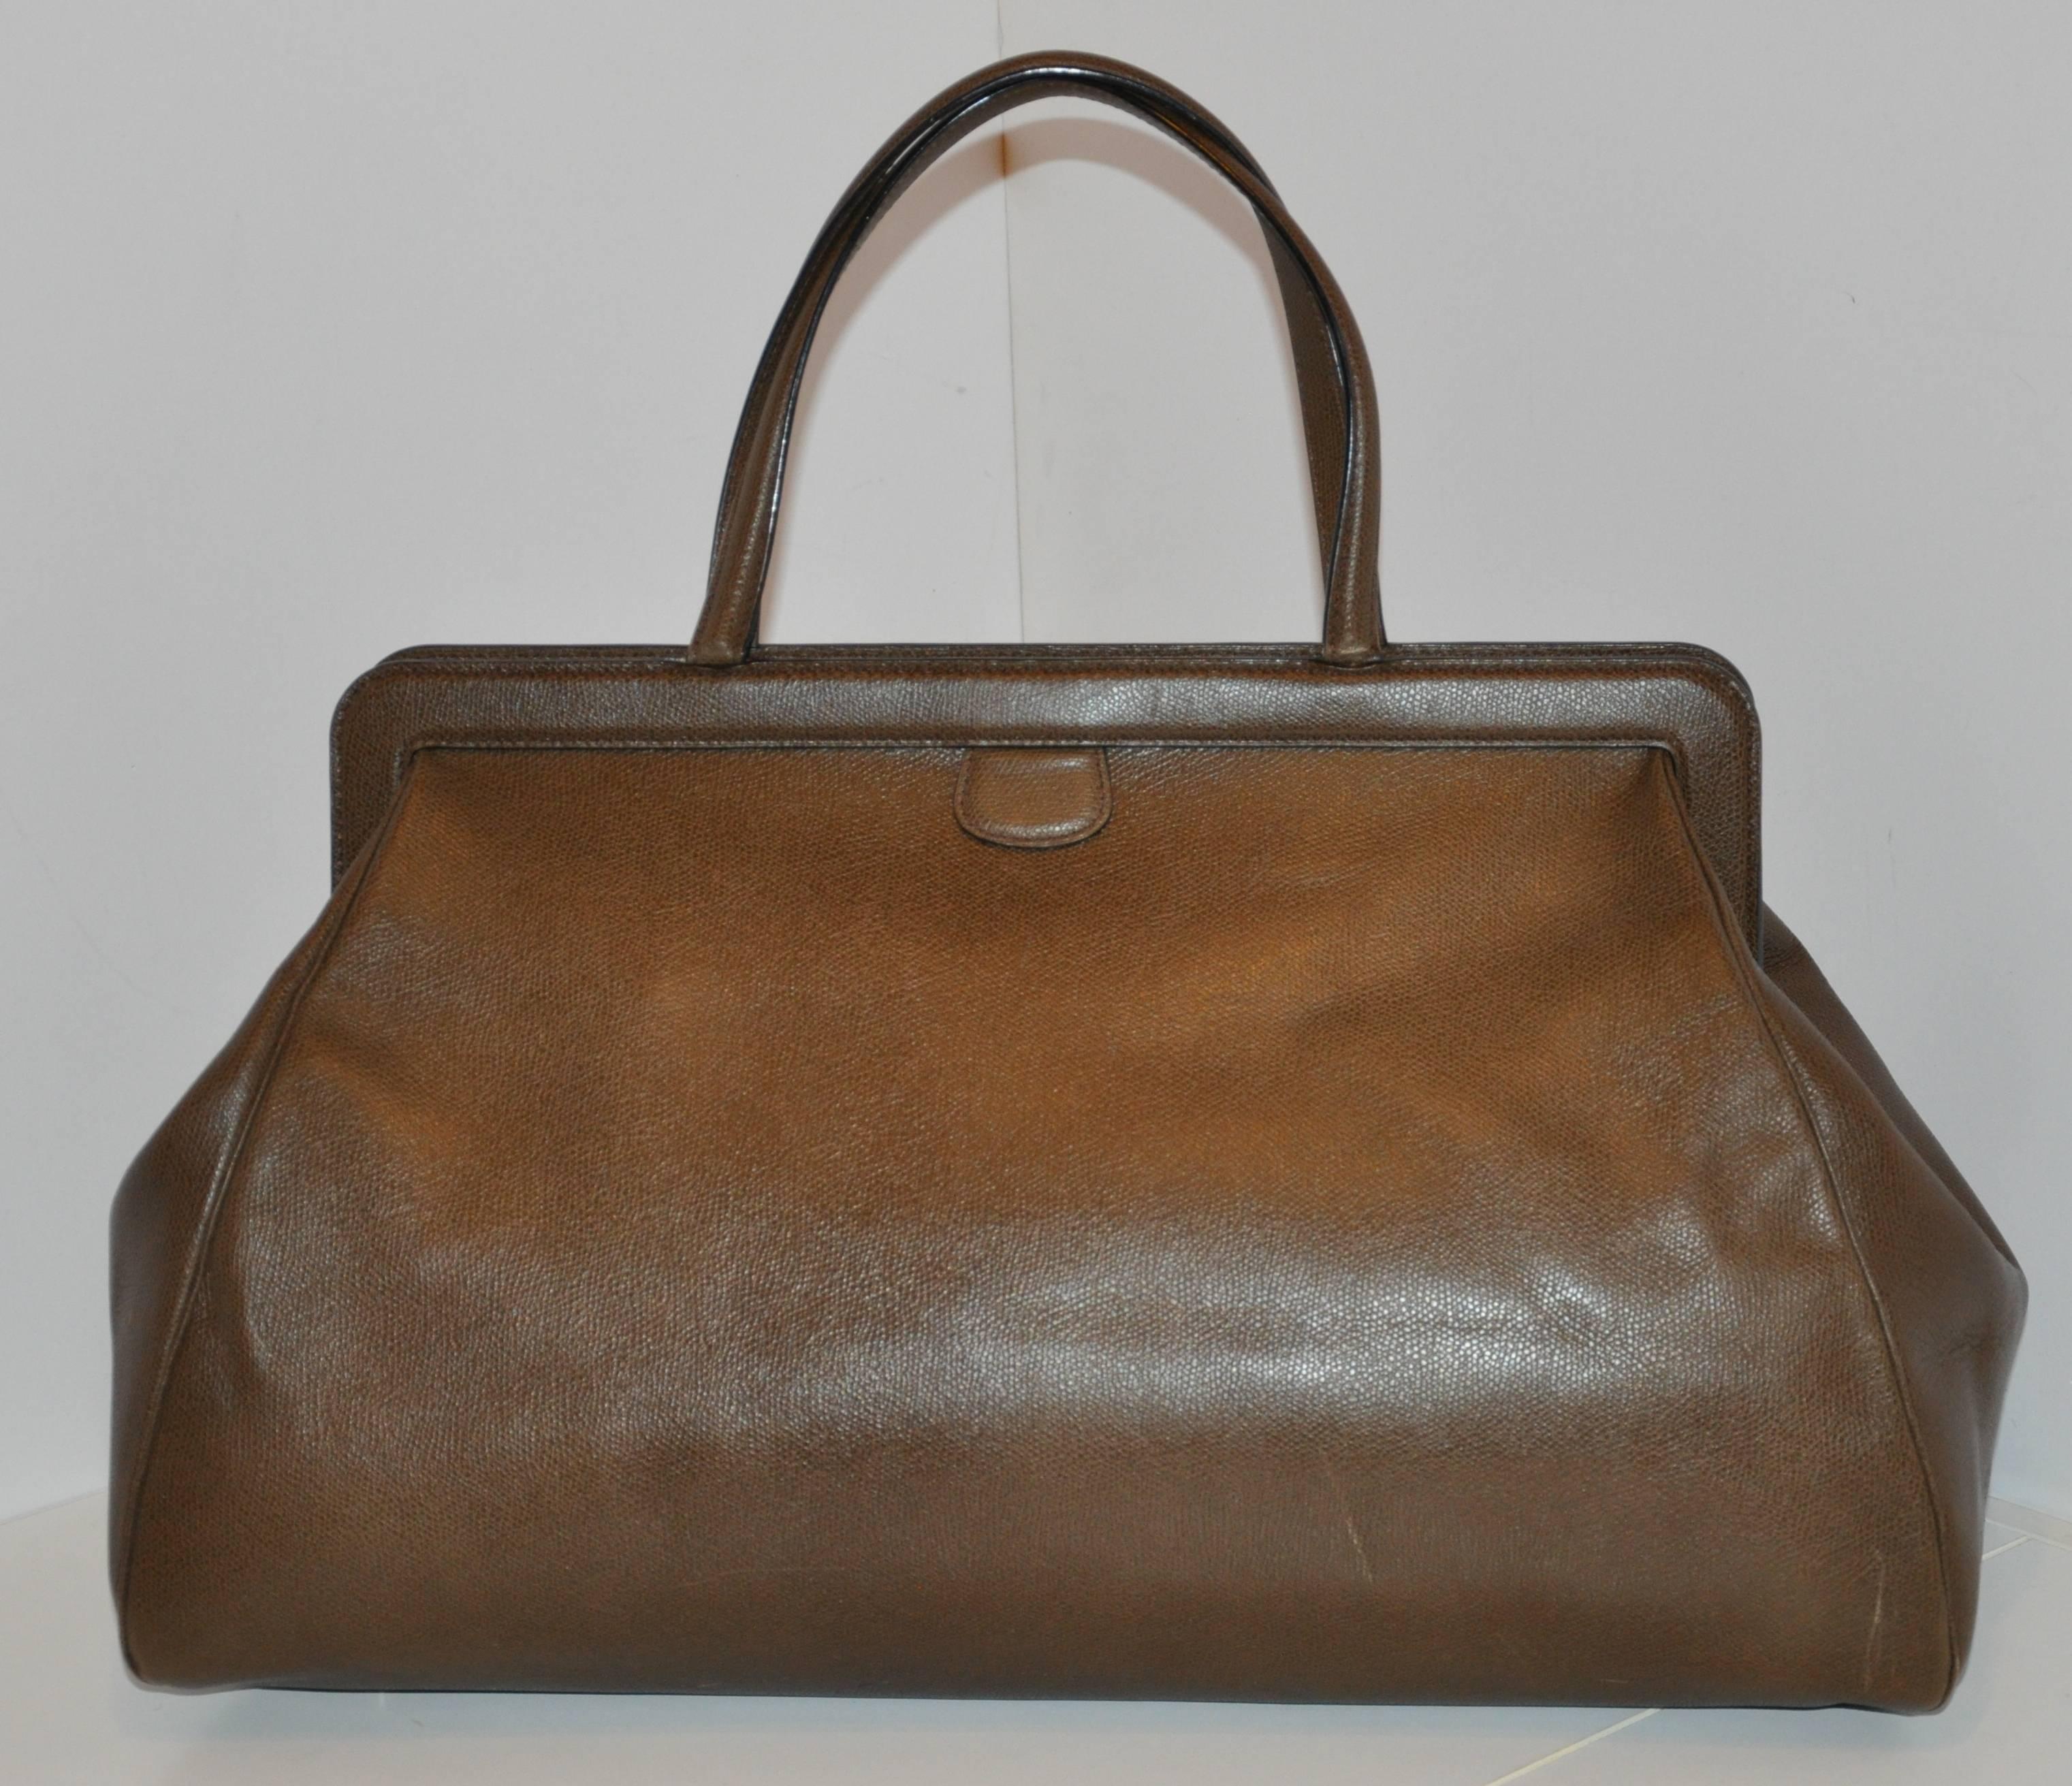         Valextra wonderful large textured brown calfskin zippered top handbag has an optional adjustable shoulder strap if needed. This large handbag is fully lined with tan leather as well as a interior large zippered compartment within. The